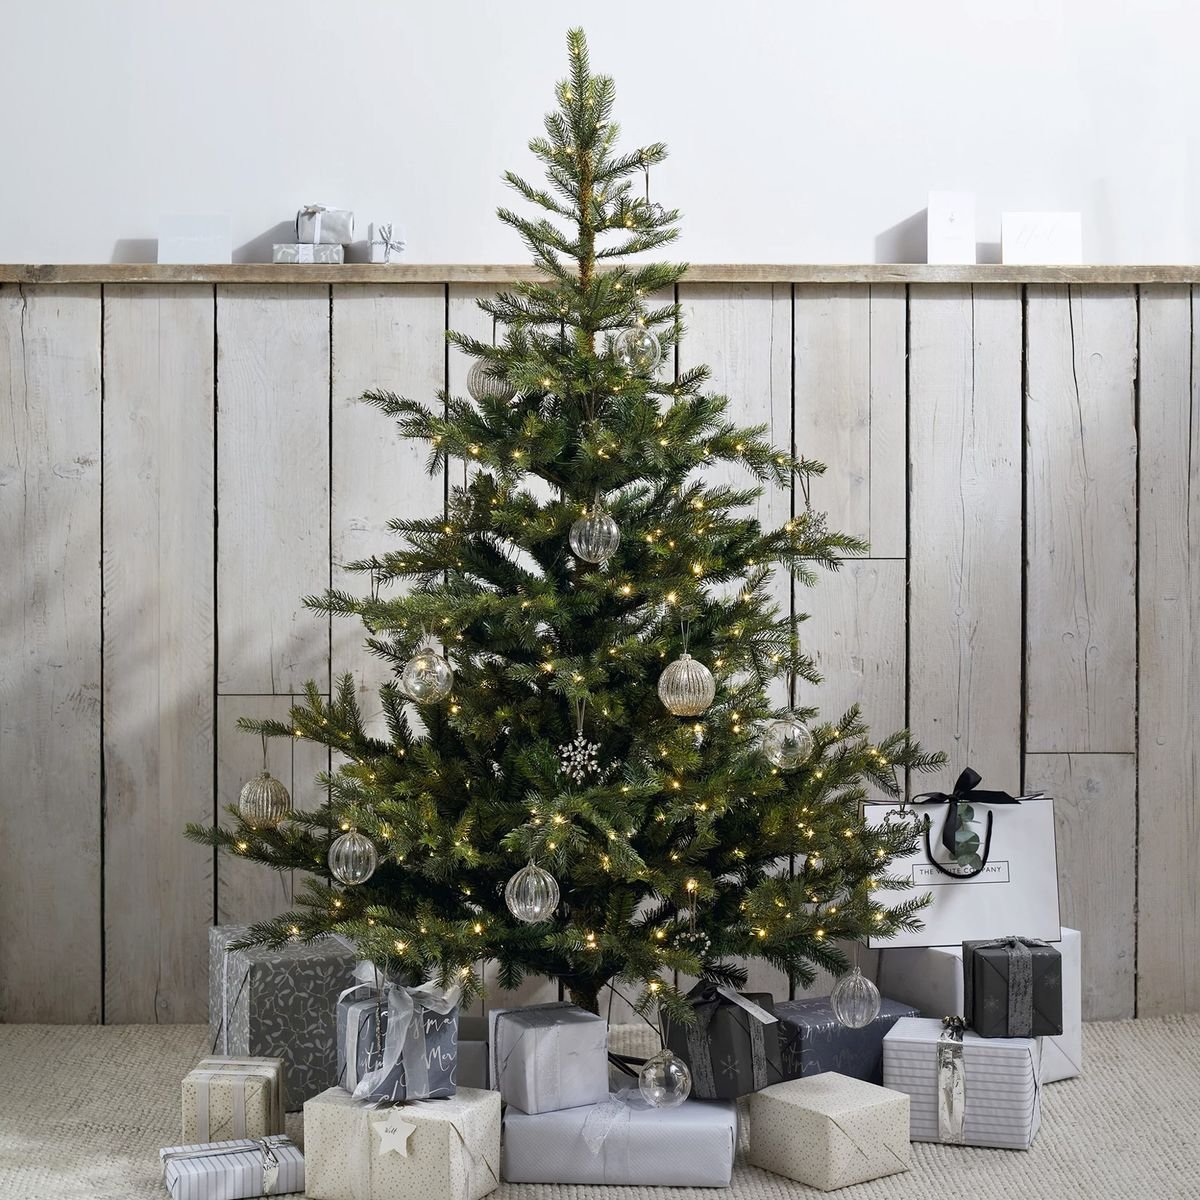 Move fast – the White Company Christmas tree that always sells out before December is 20% off